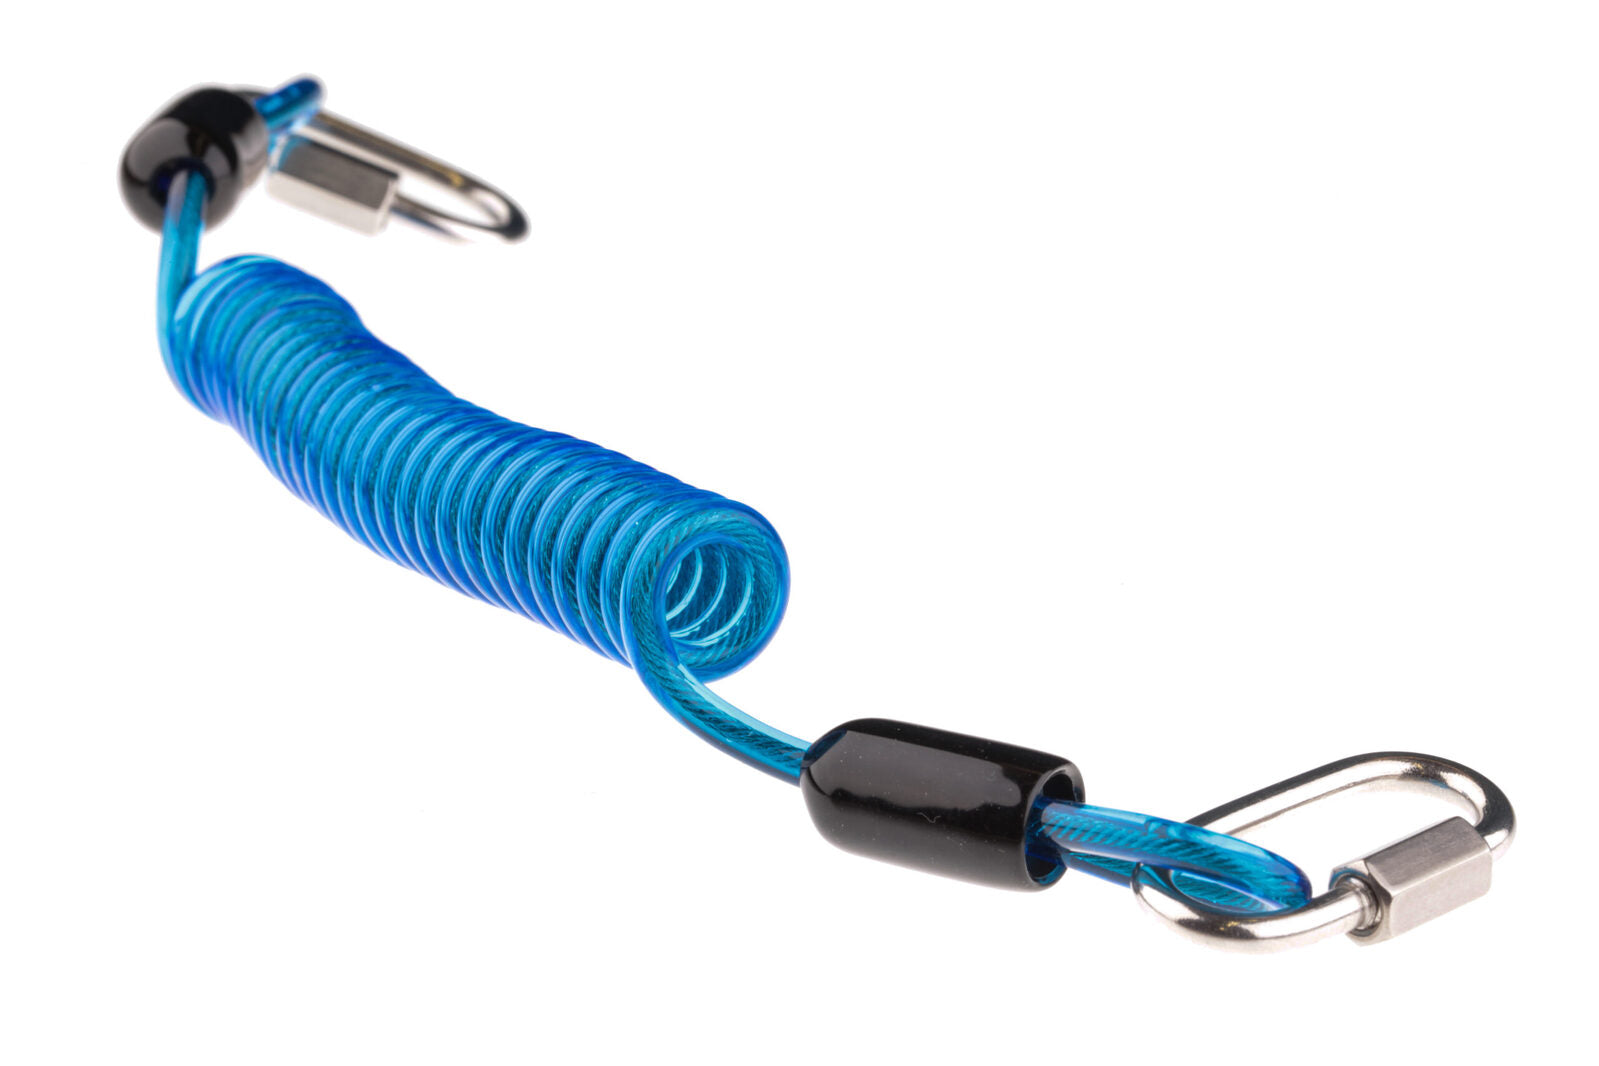 Toit TOIT08 Tools Blue Coil Tether Lanyard